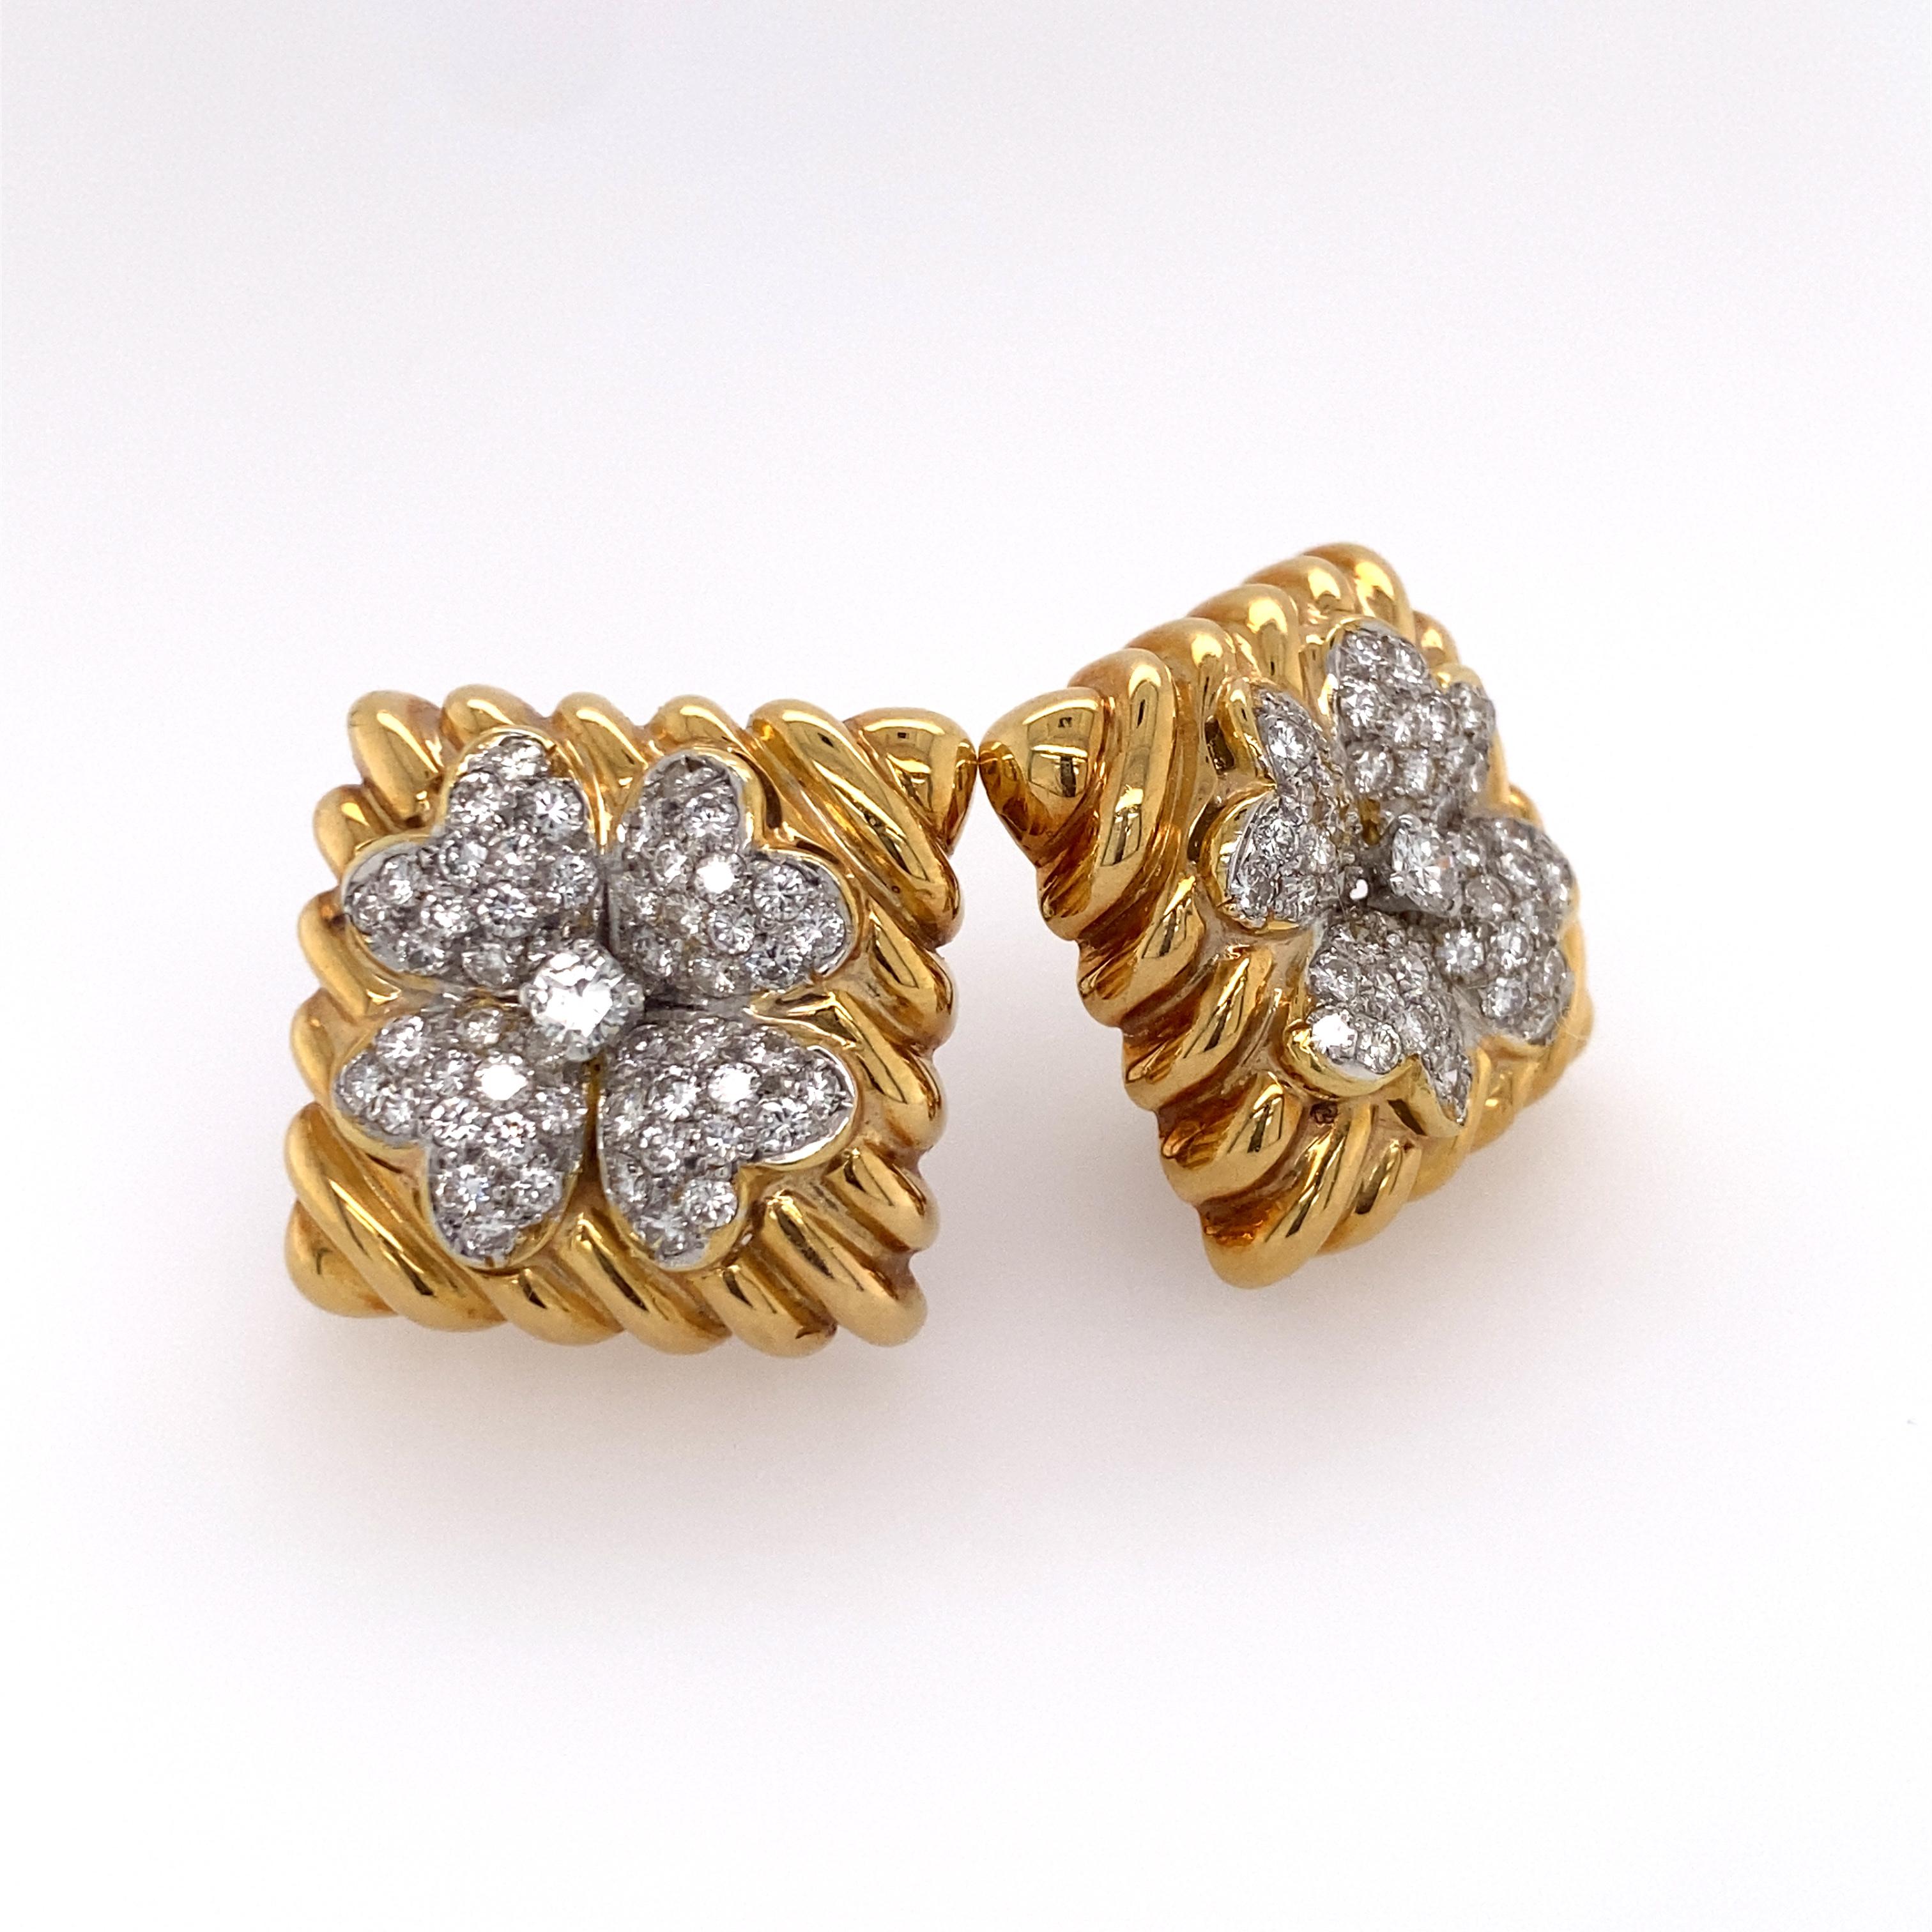 Pair of 18k gold earrings by David Webb, the  square fluted ear clips each featuring a four-leaf clover design centering a round brilliant-cut diamond weighing approx. 0.15 ct. framed by pave-set full-cut diamond leaves; approx. 3.75 tcw.; signed;